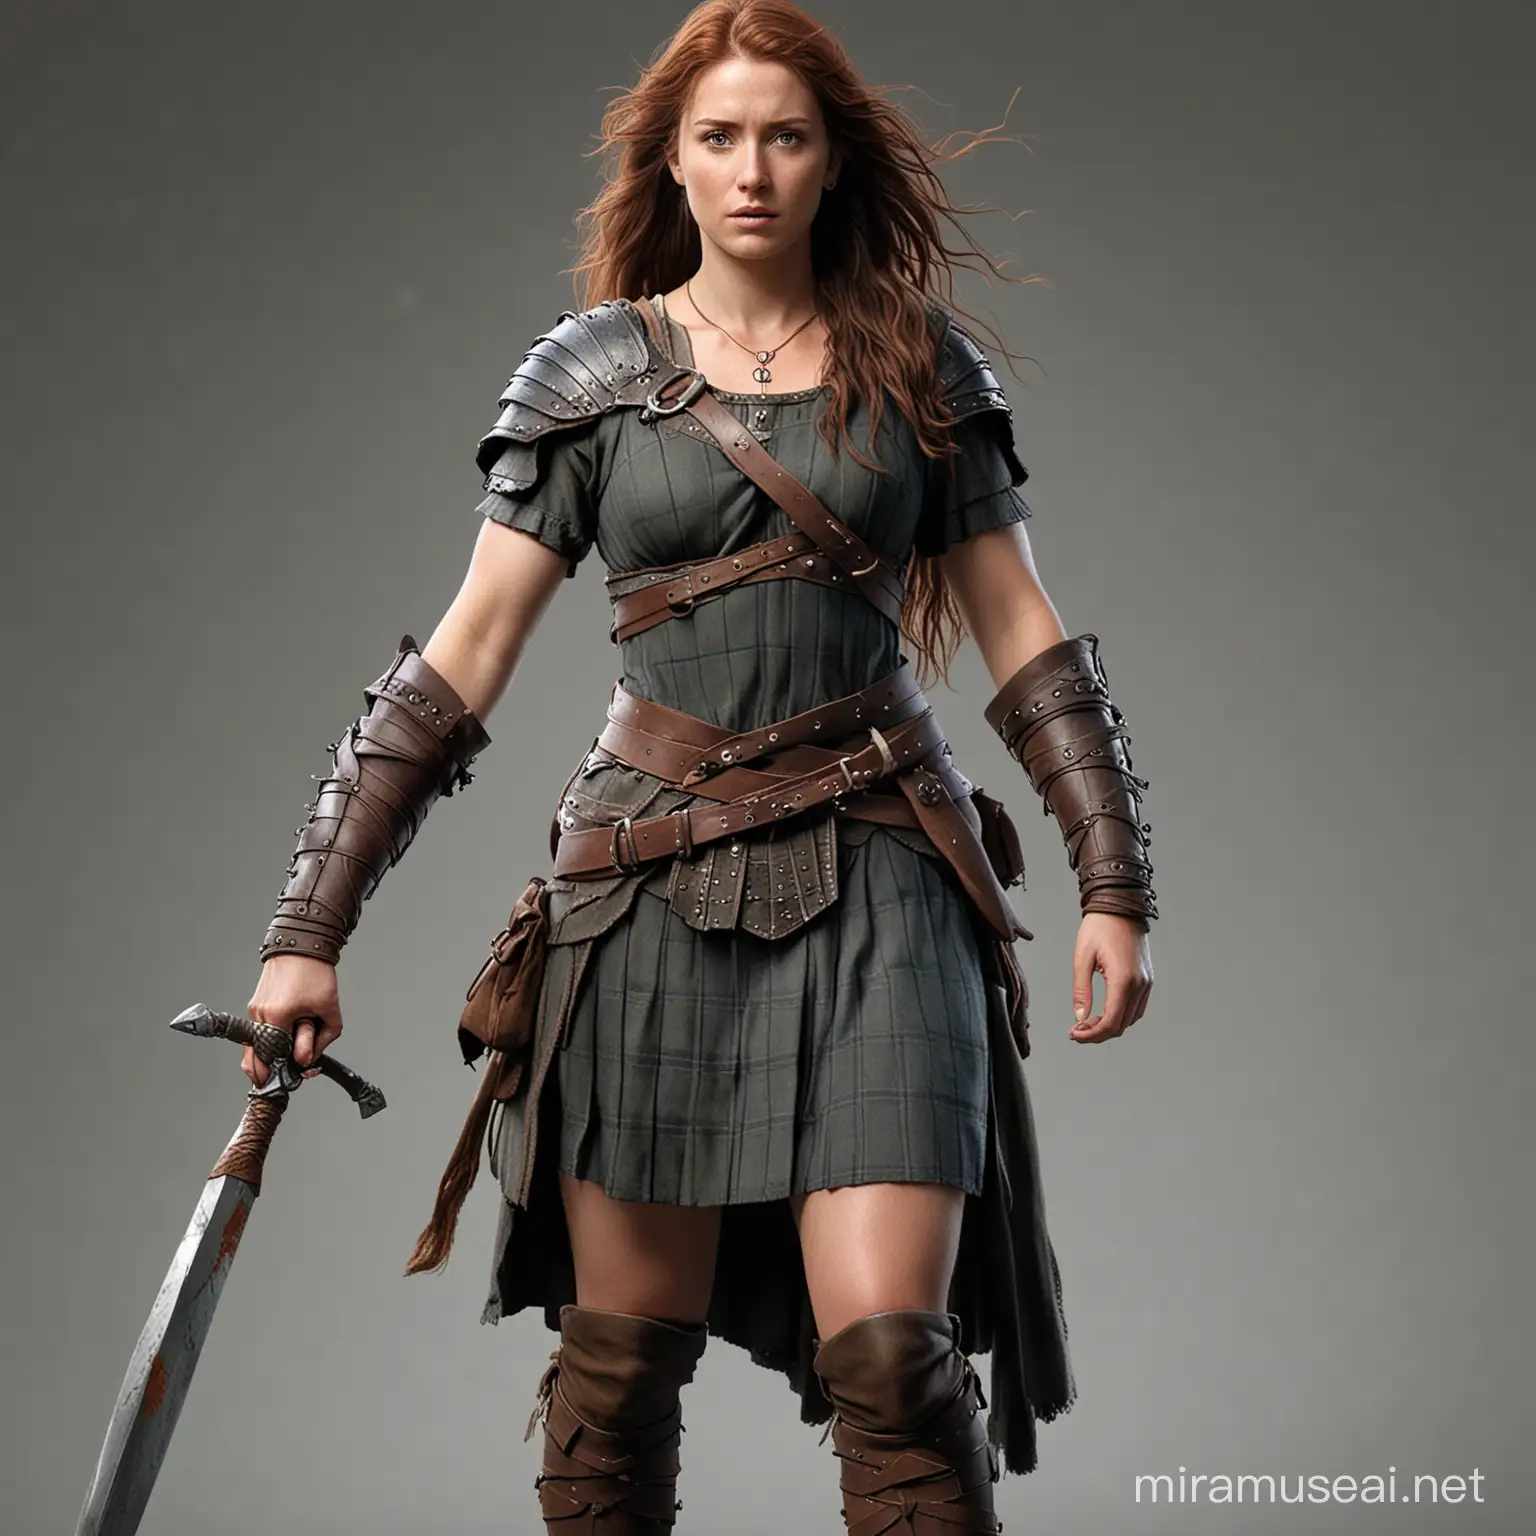 draw a full body female version of the scottish warrior William Wallace from the movie braveheart